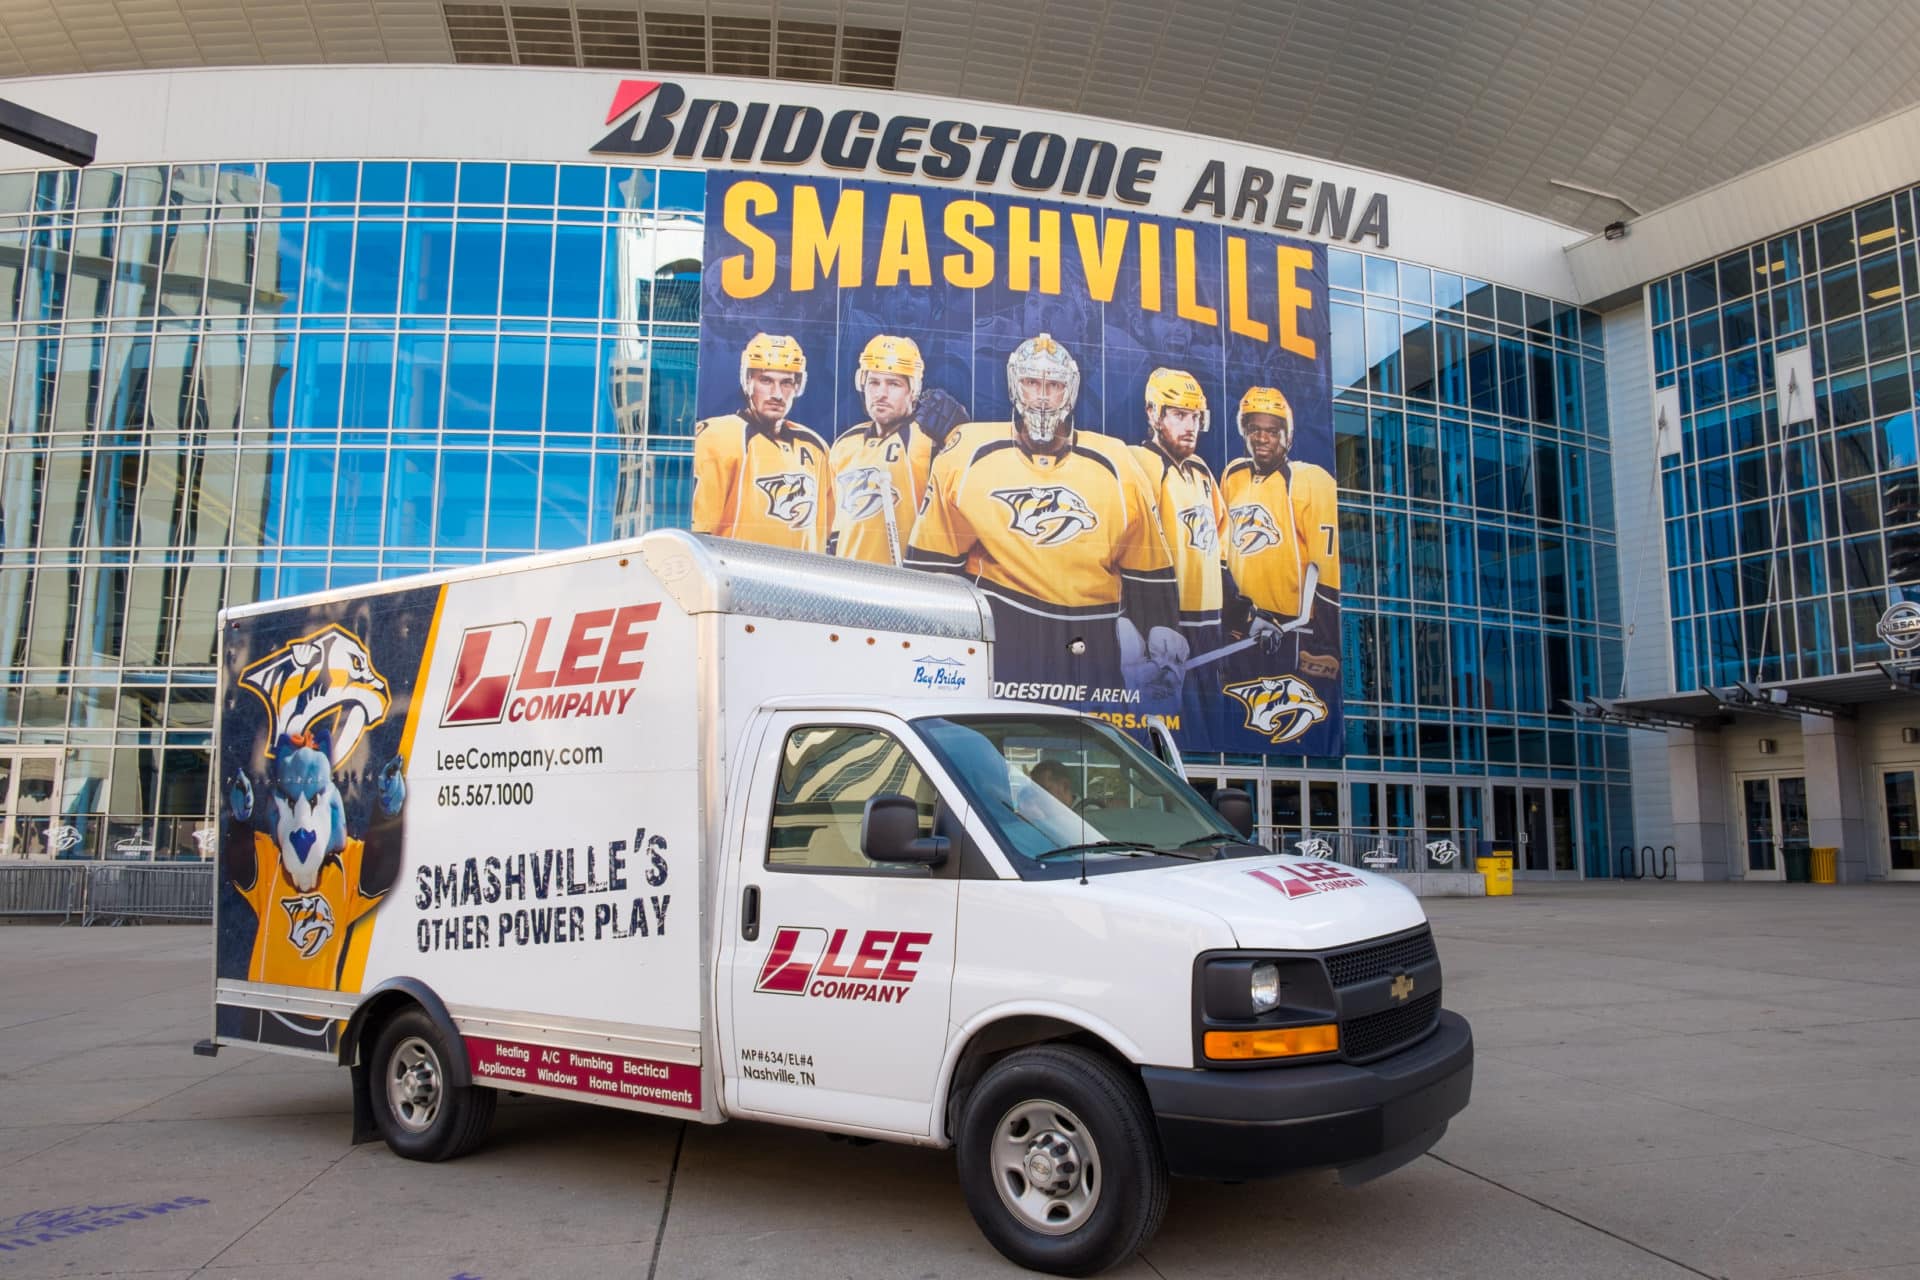 Nashville Commercial & Residential Services - Lee Company